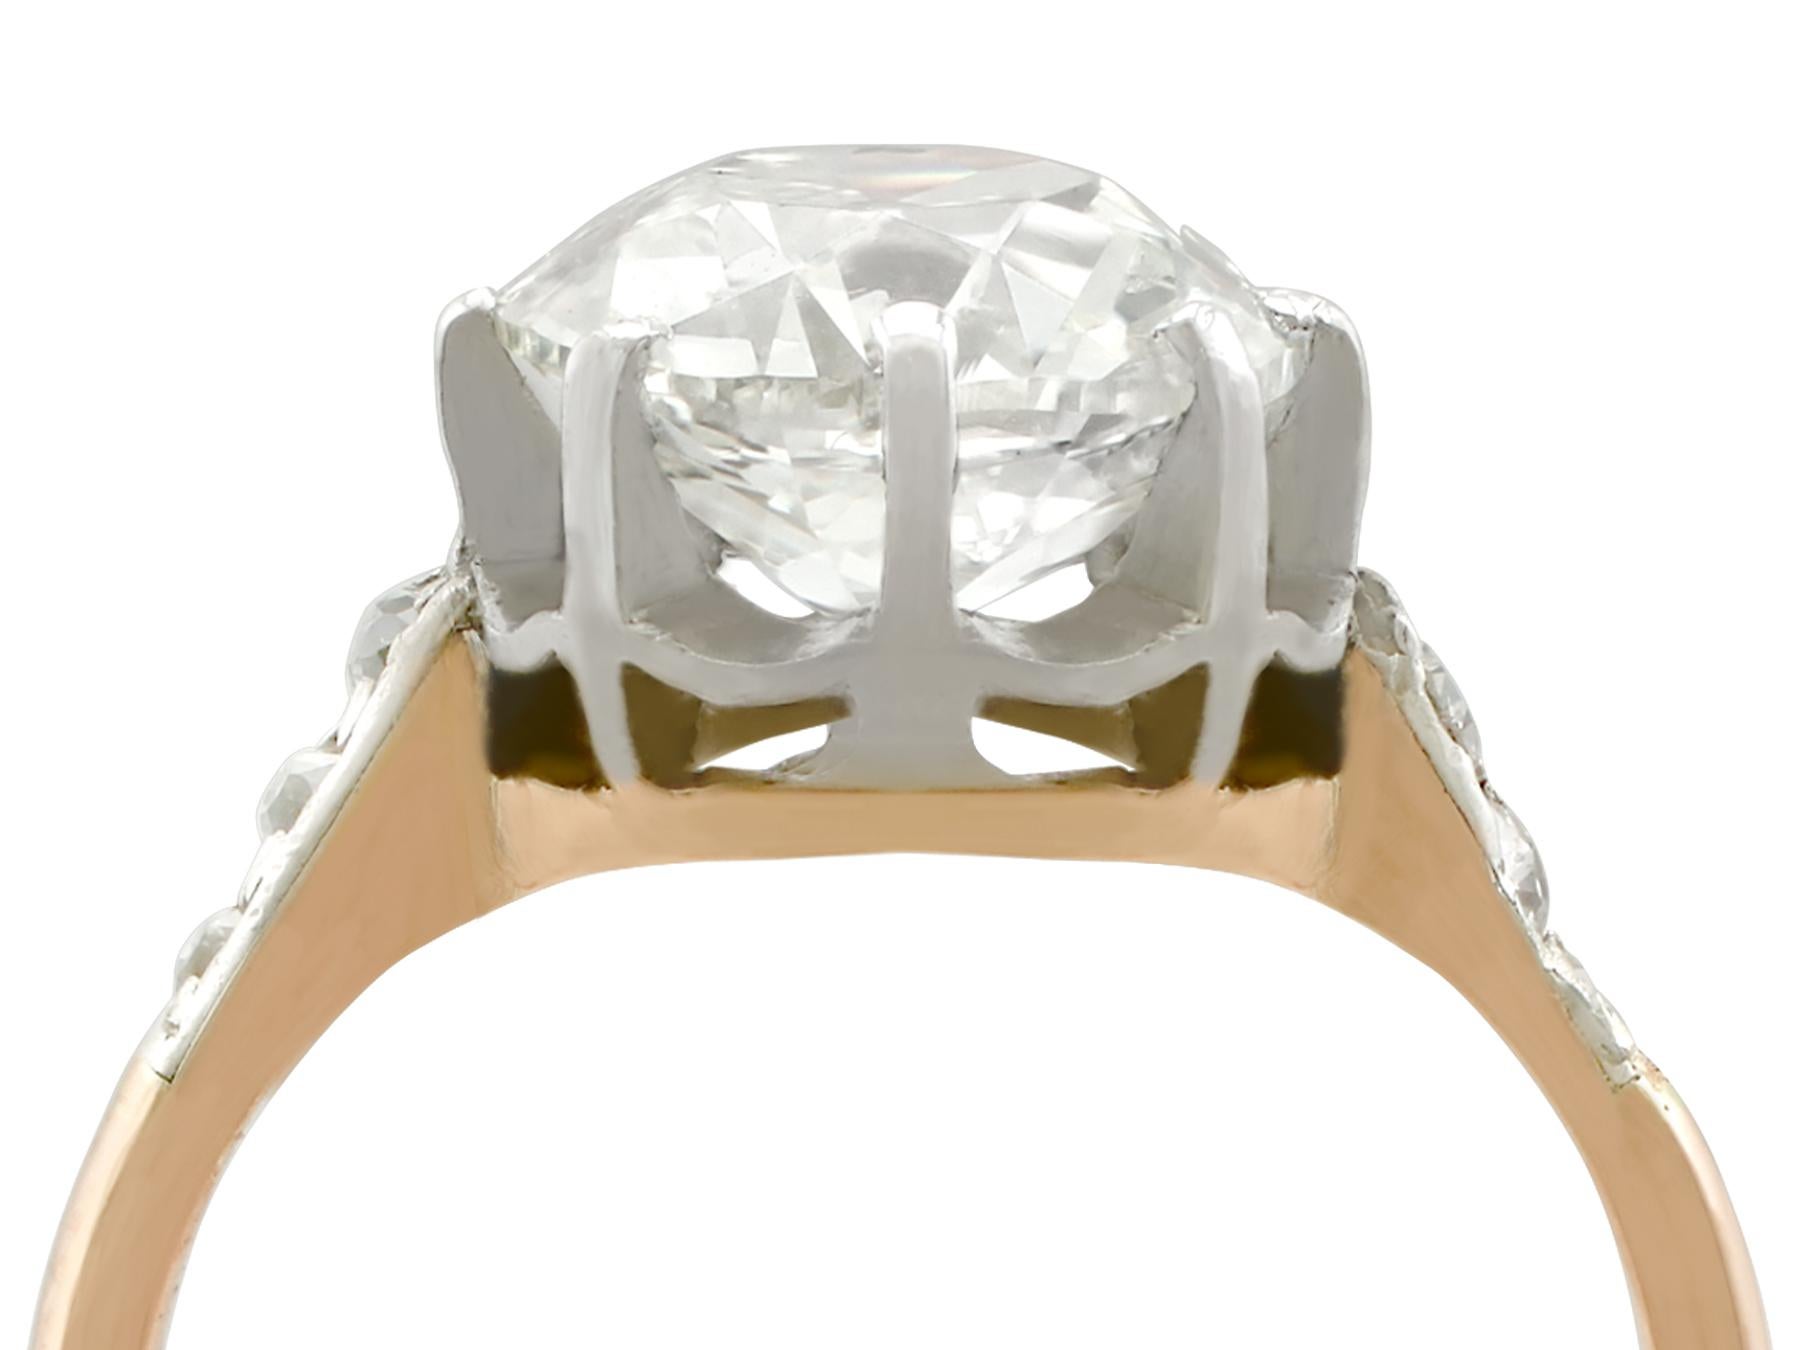 A stunning antique 2.56 carat diamond and 18 karat yellow gold, silver set solitaire style engagement ring; part of our diverse antique jewelry collections.

This stunning, fine and impressive antique diamond solitaire ring has been crafted in 18k